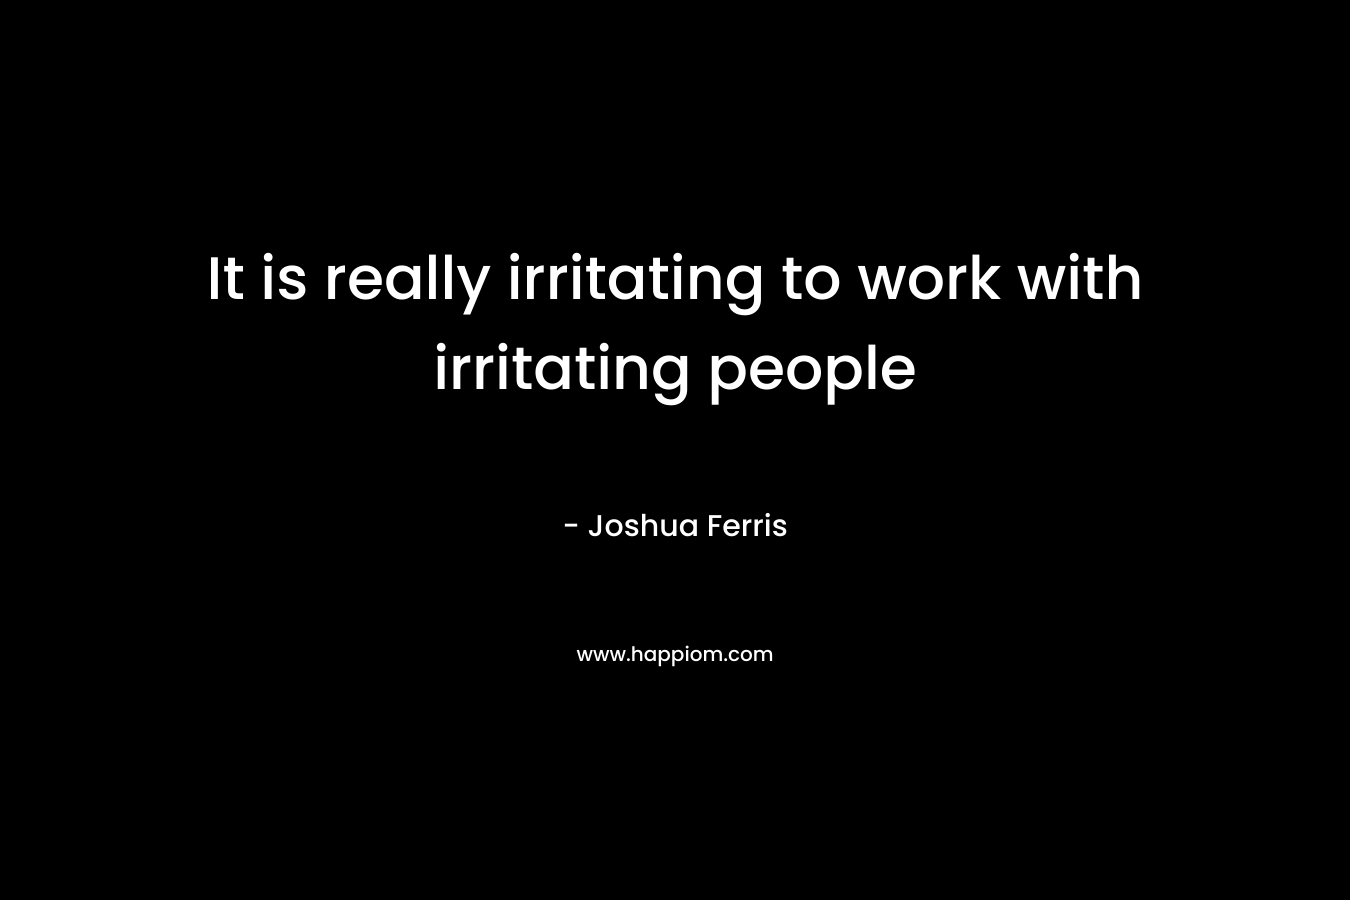 It is really irritating to work with irritating people